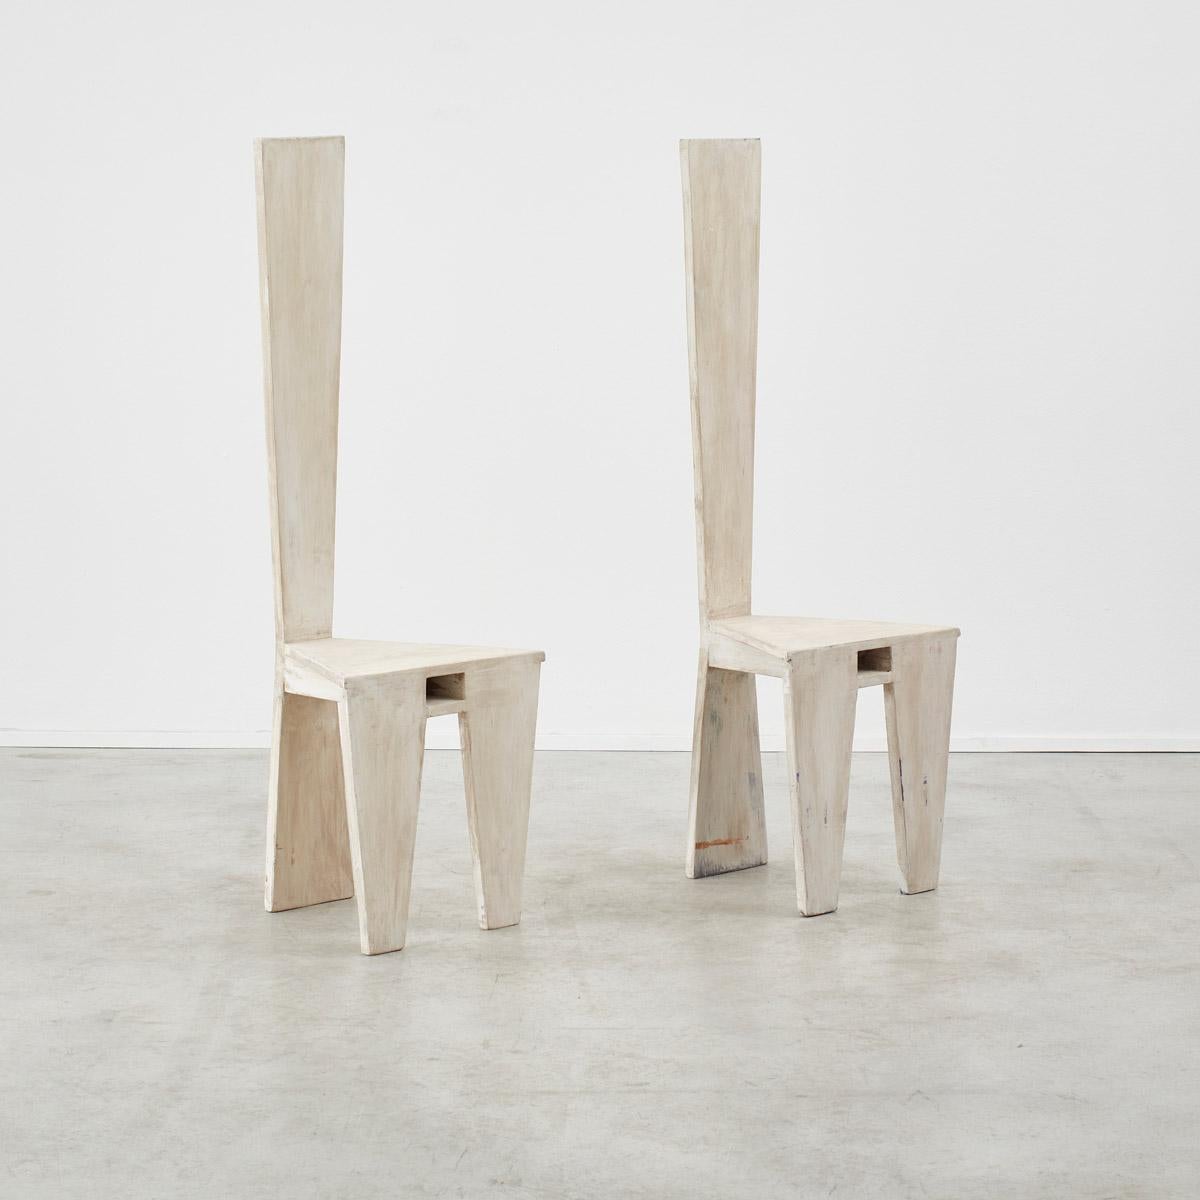 With the poise of an exclamation mark these artist-made wooden sculptural chairs make an architectural statement. Their distressed and chalk-painted surface has bags of lime-washed patina, giving it a weathered look. They’re flexible in their